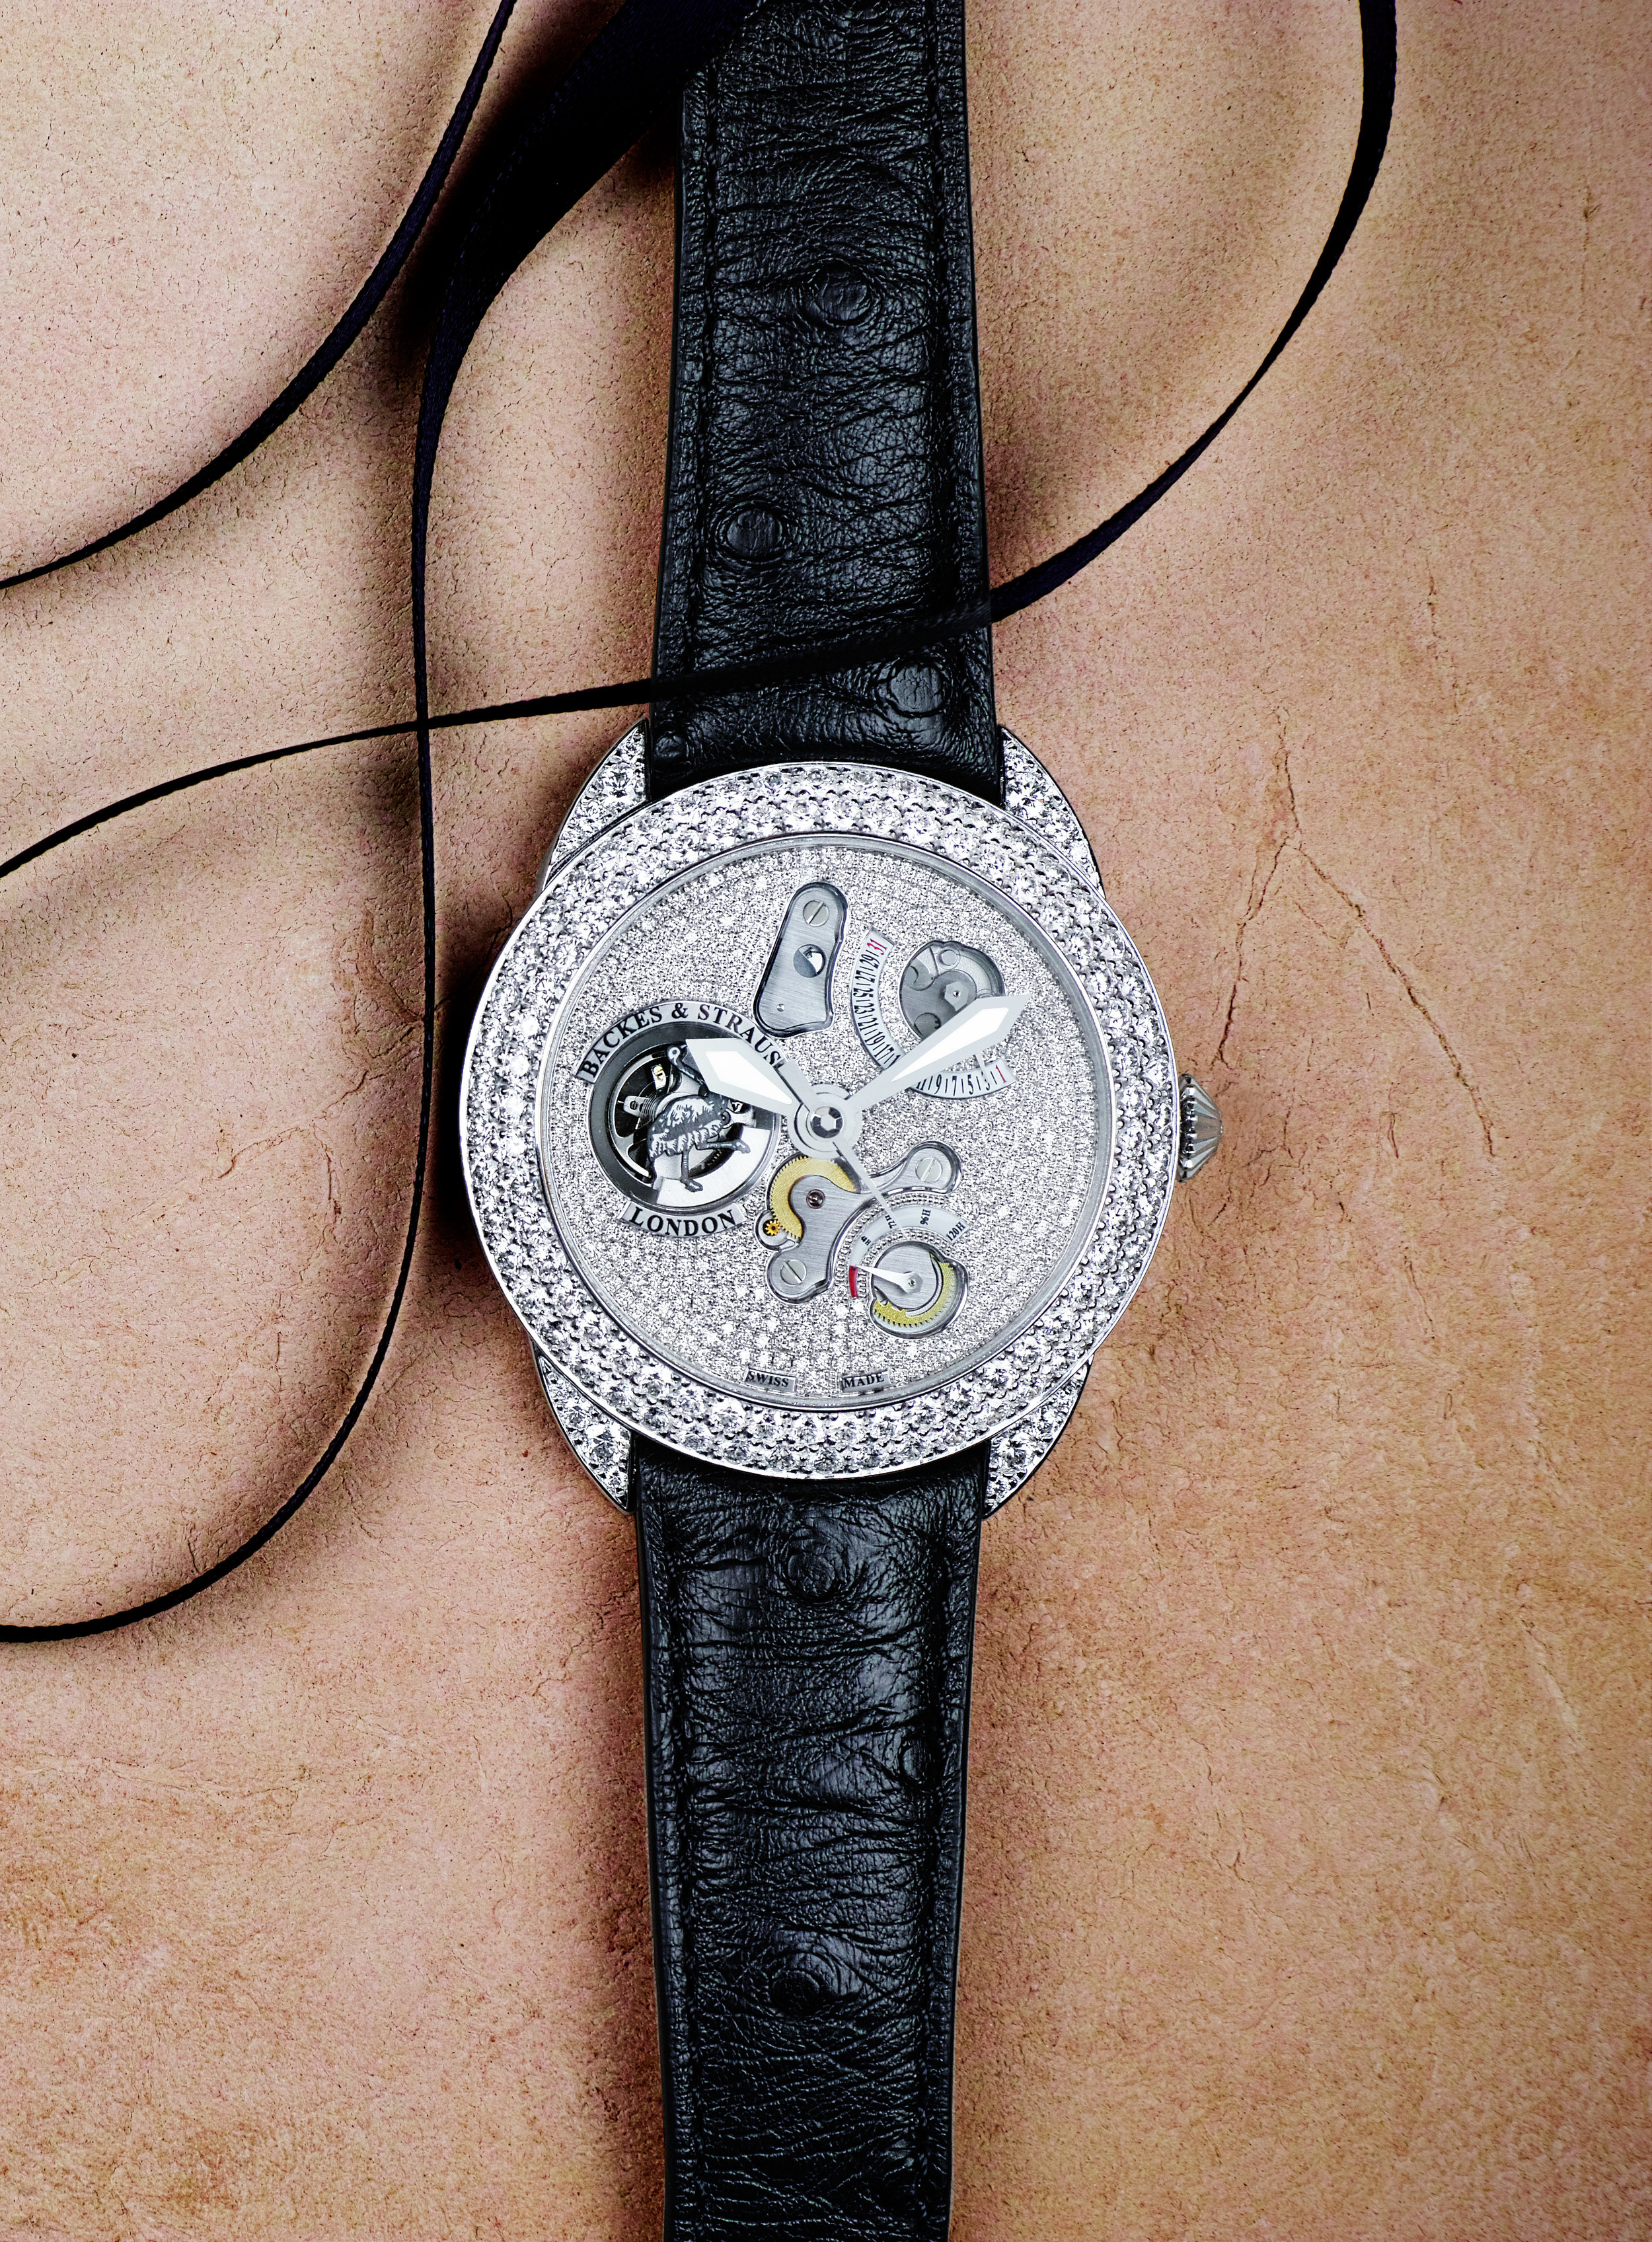 Earl of Strauss 45 limited edition diamond encrusted watch